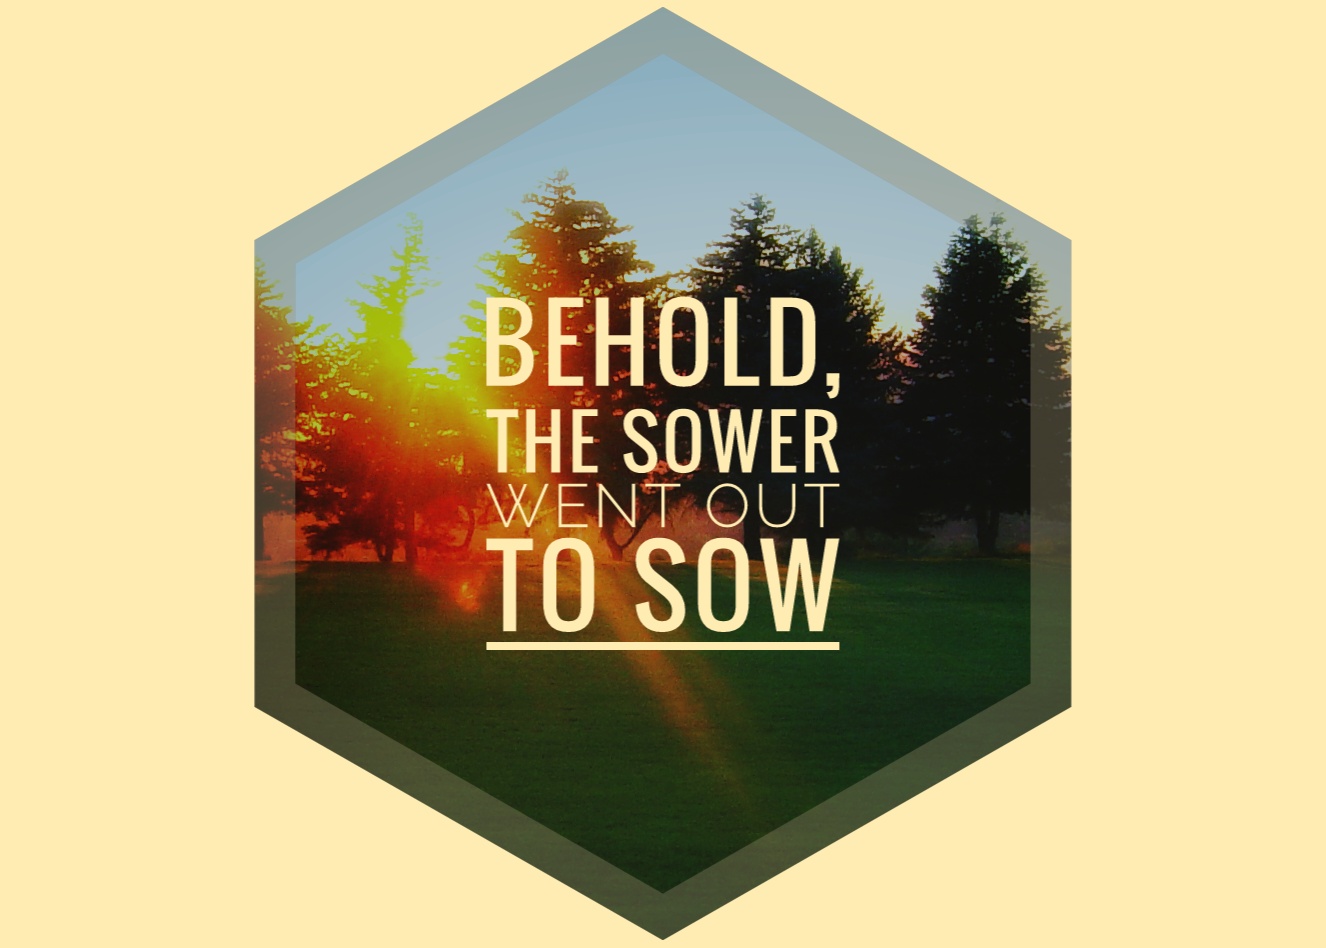 Behold the sower went out to sow